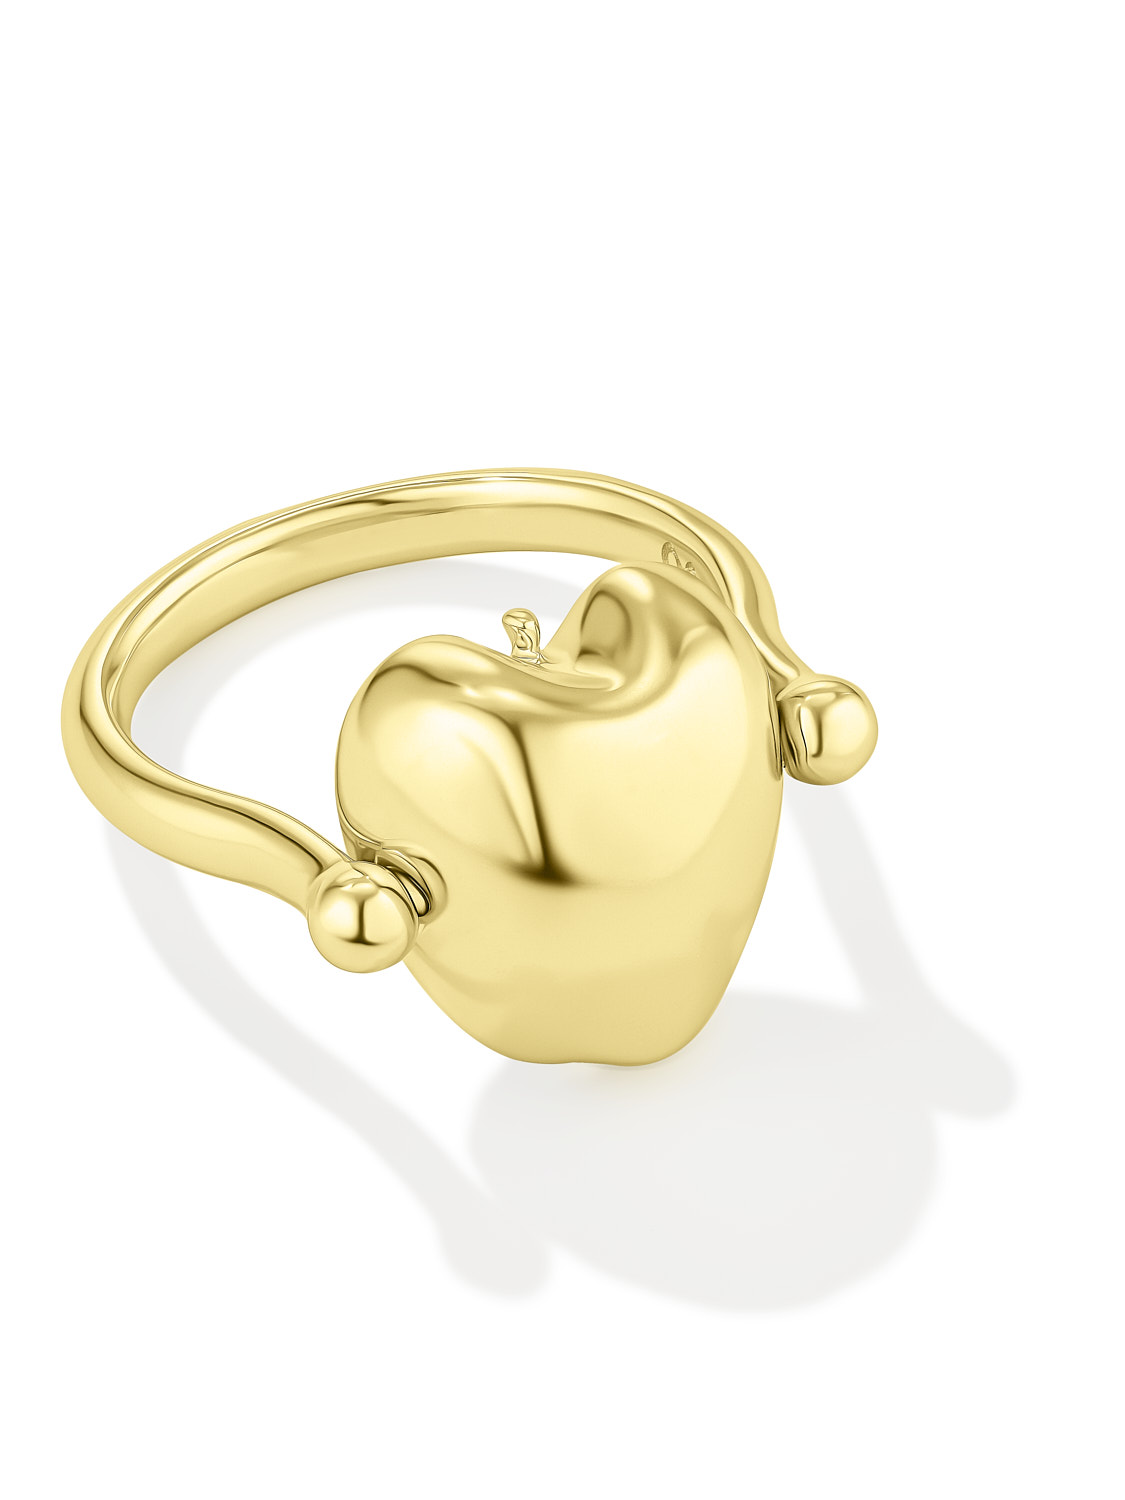 HALF AN APPLE FLIP RING GOLD-PLATED  